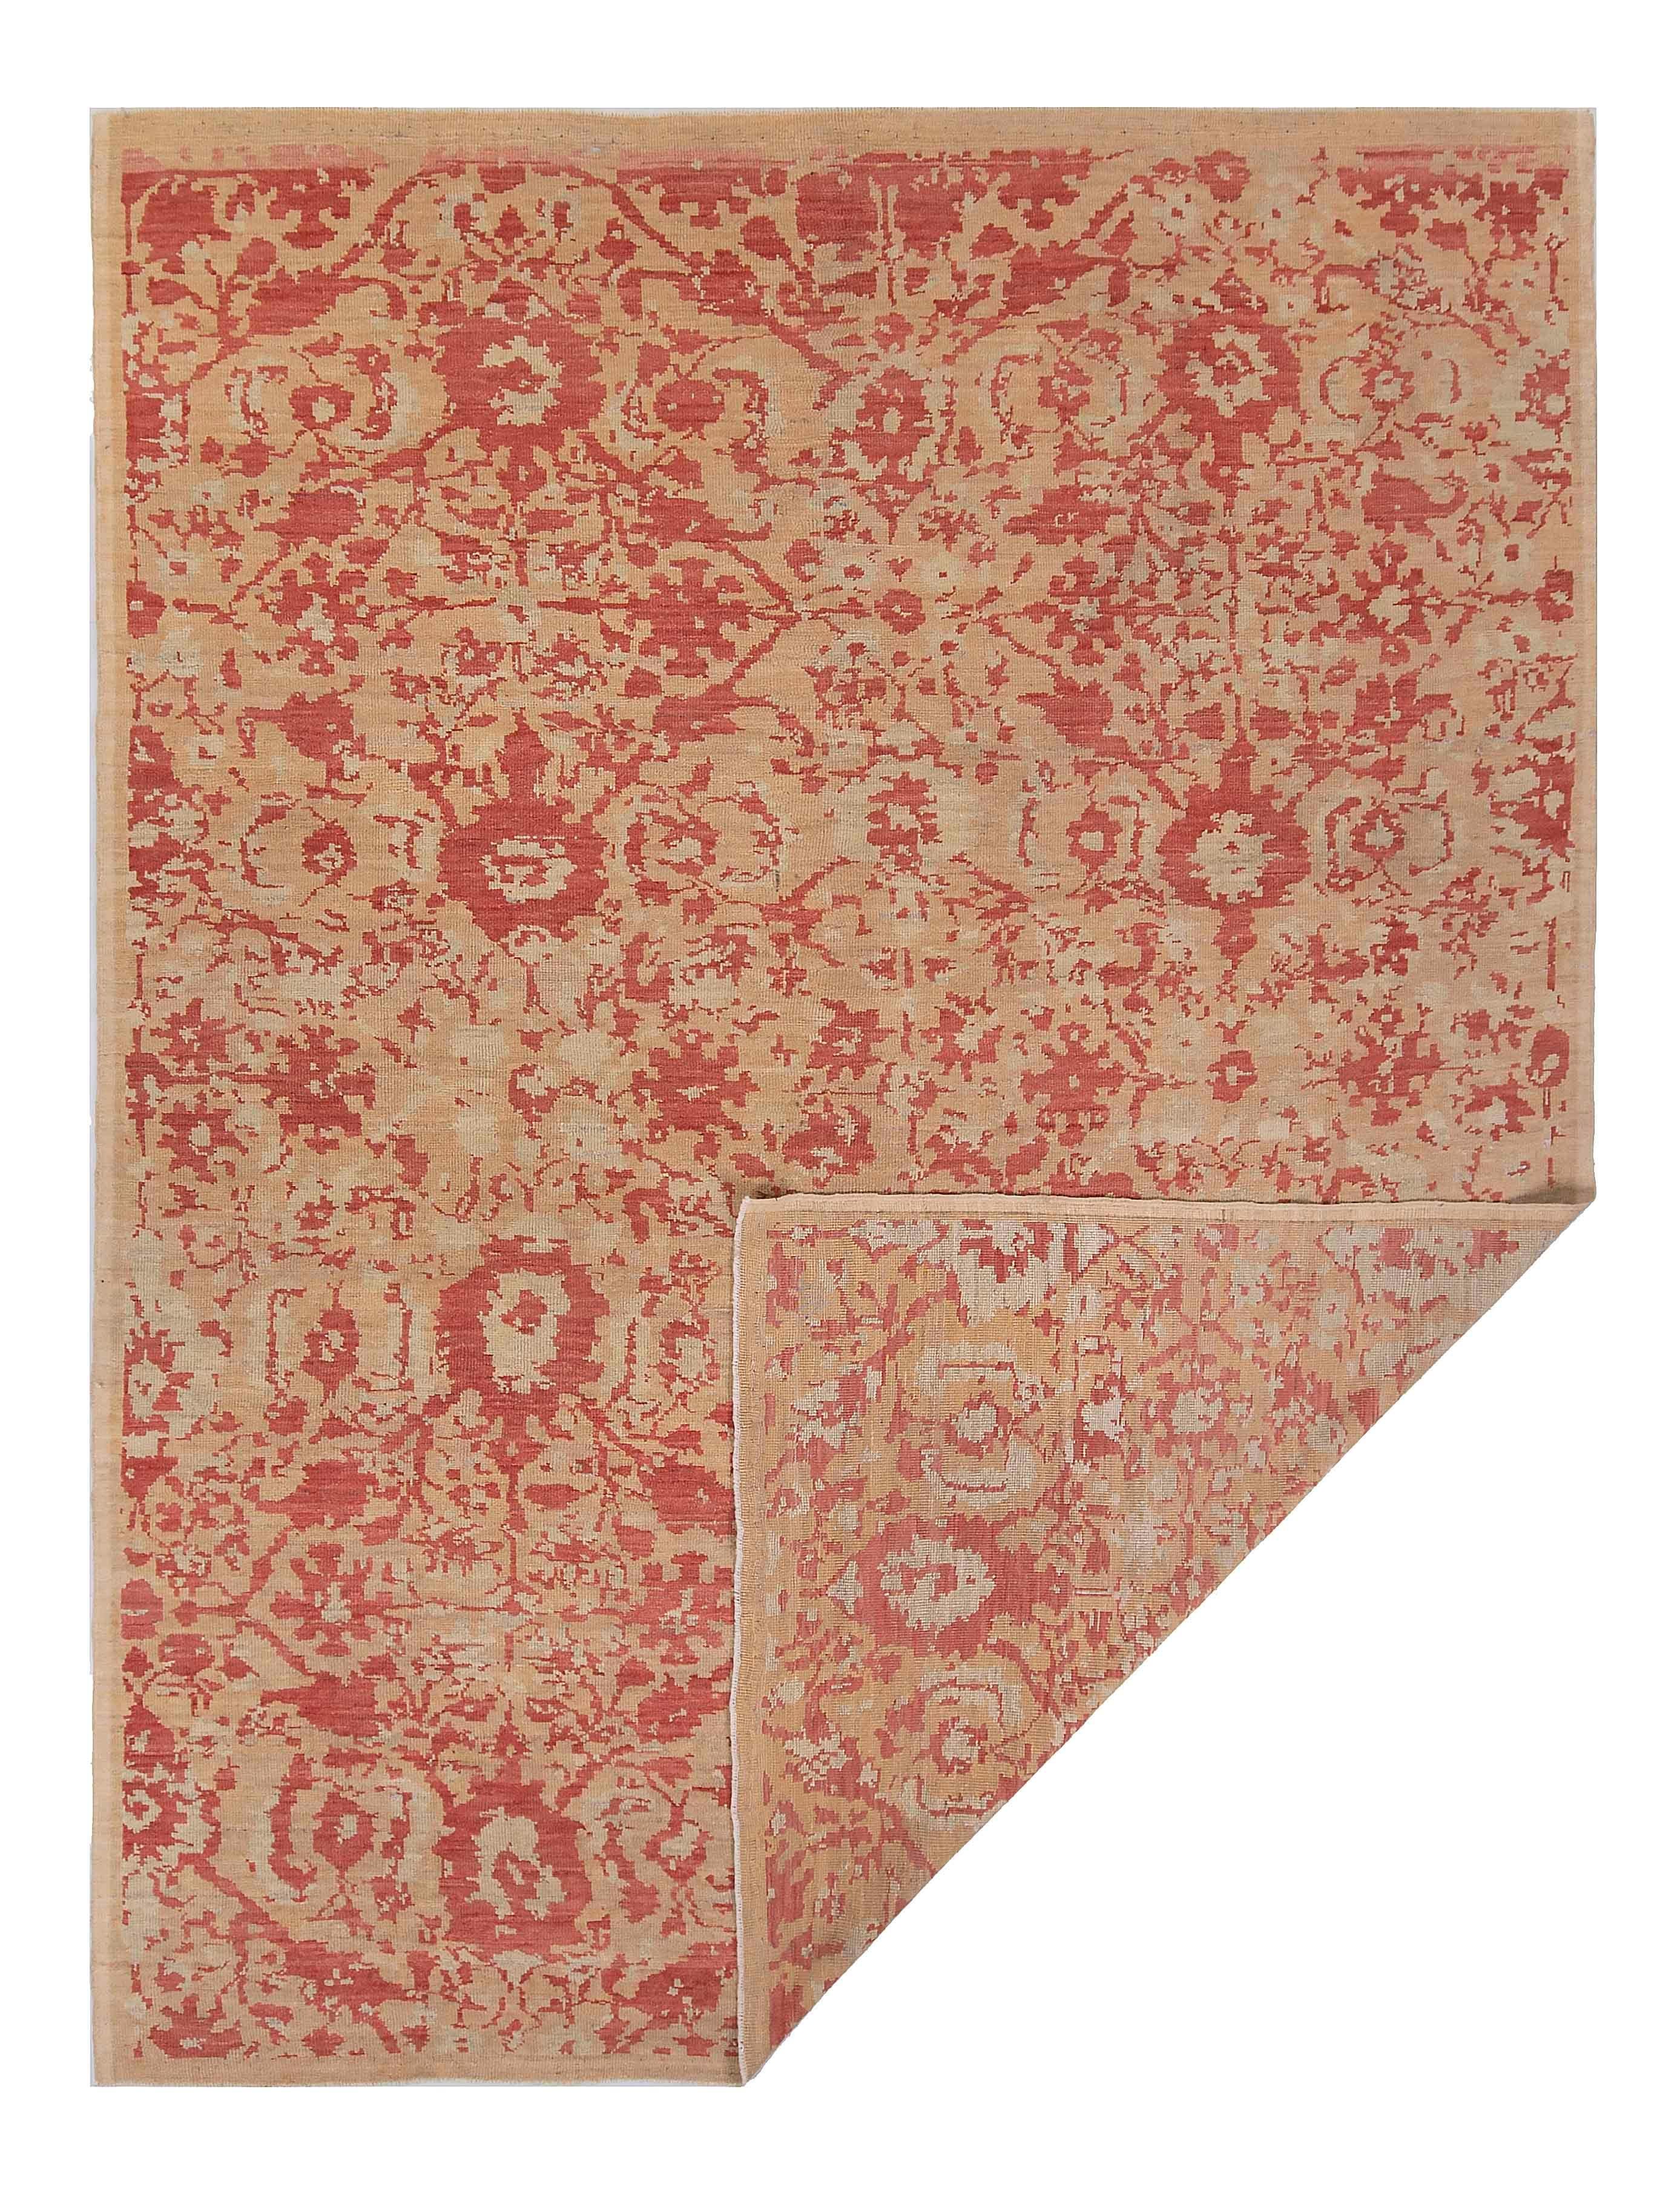 Hand-Woven New Turkish Oushak Rug with Red Floral Details on Ivory & Beige Field For Sale